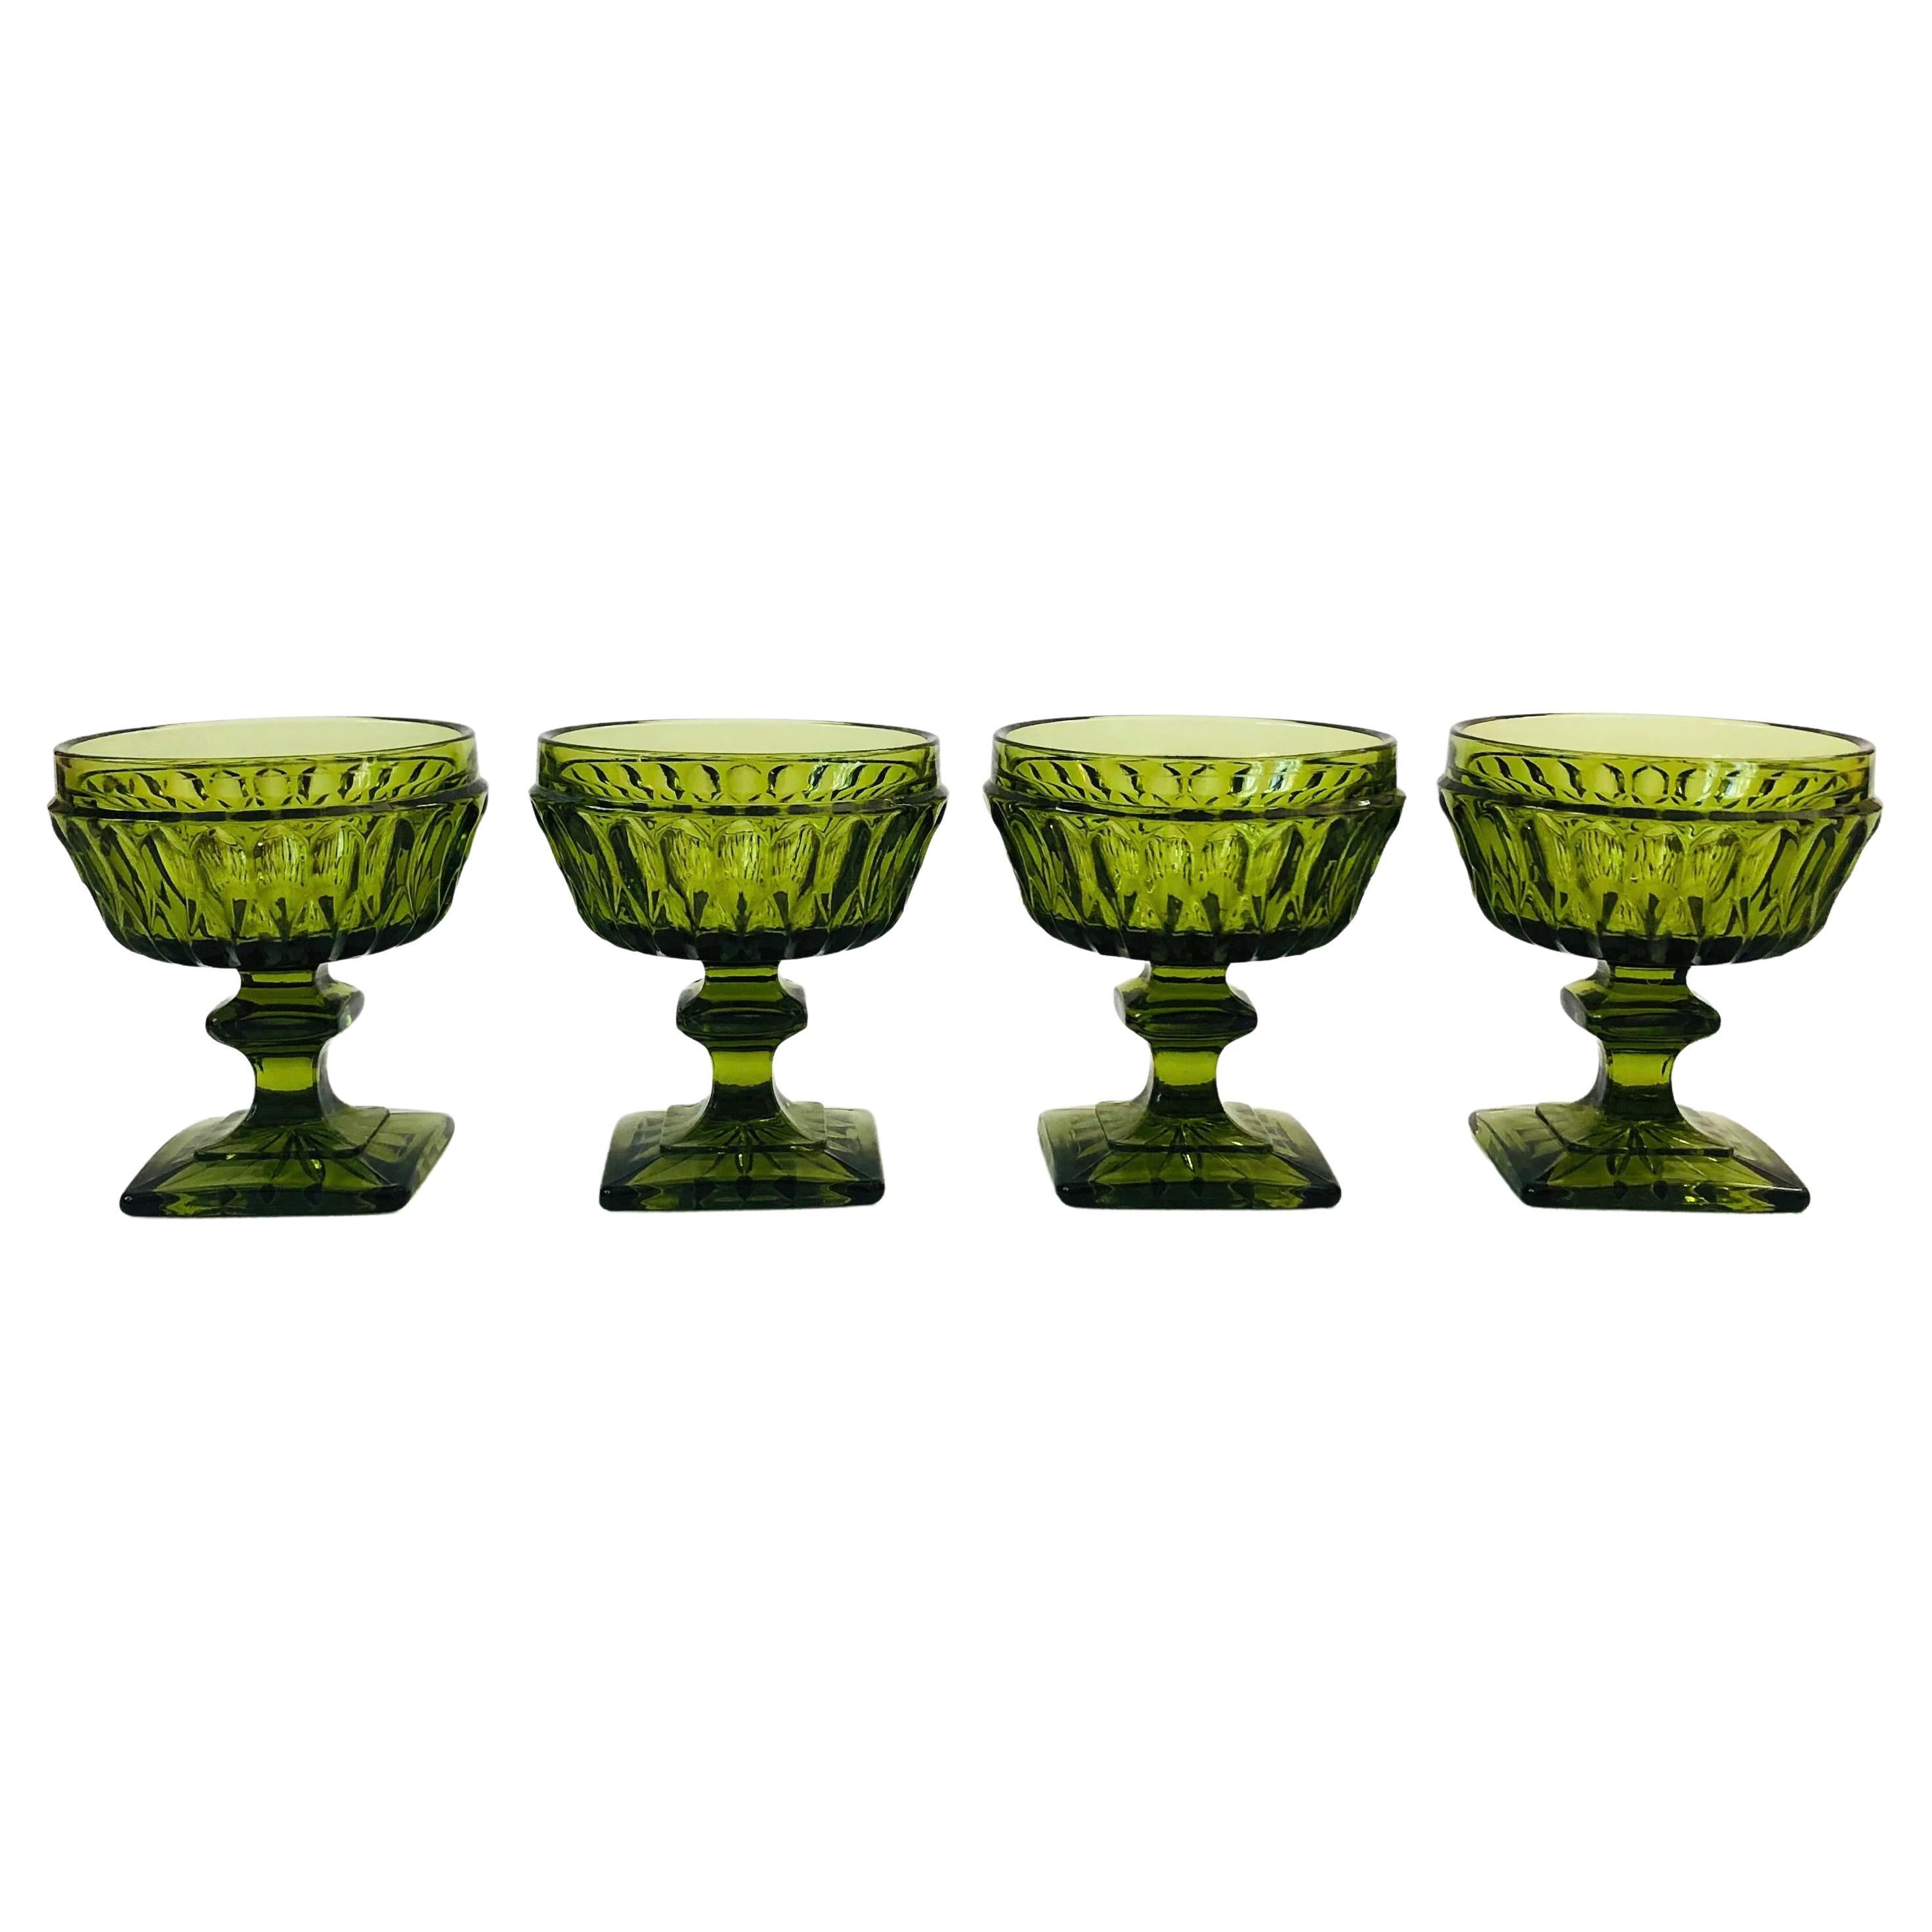 https://a.1stdibscdn.com/vintage-indiana-glass-green-coupe-glasses-set-of-4-for-sale/f_59412/f_262681821637798951503/f_26268182_1637798952324_bg_processed.jpg